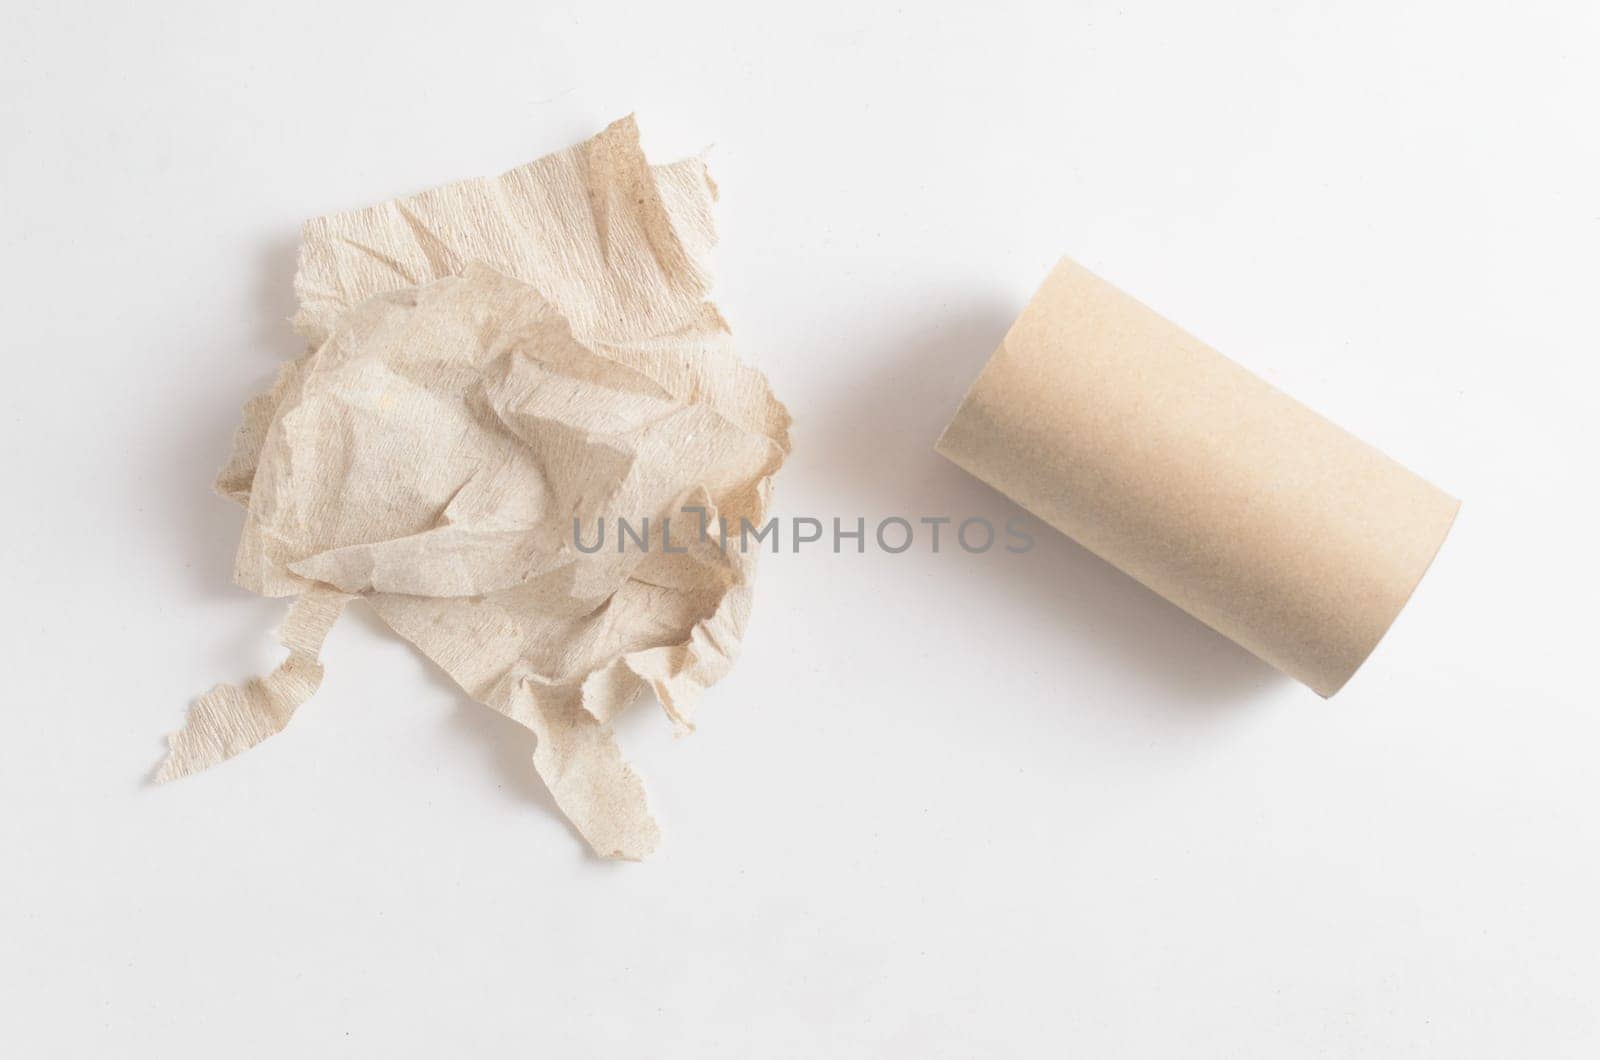 Crumpled toilet paper and empty toilet paper roll on white background.